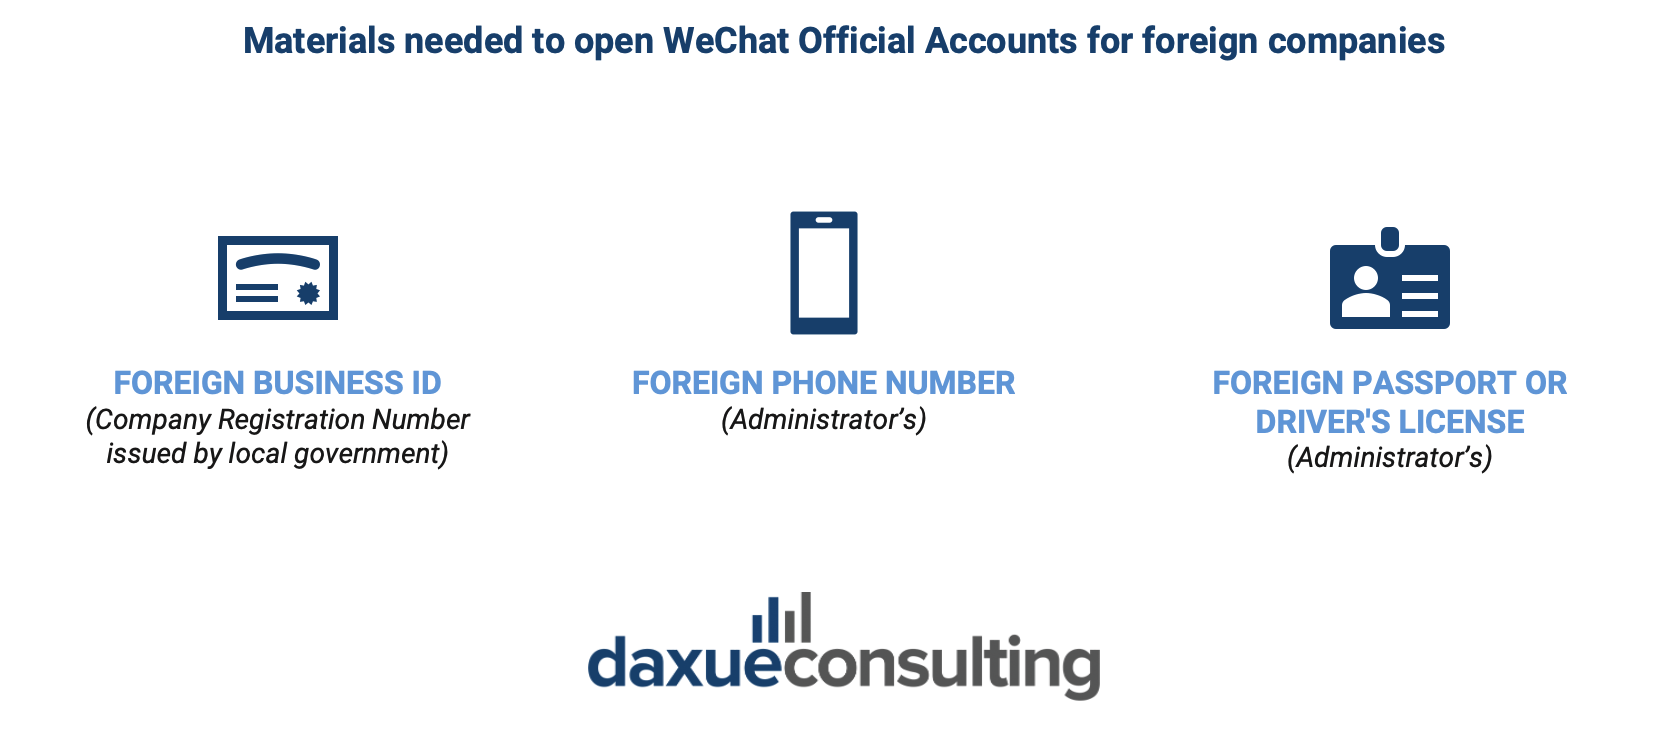 How to open a WeChat Official Account